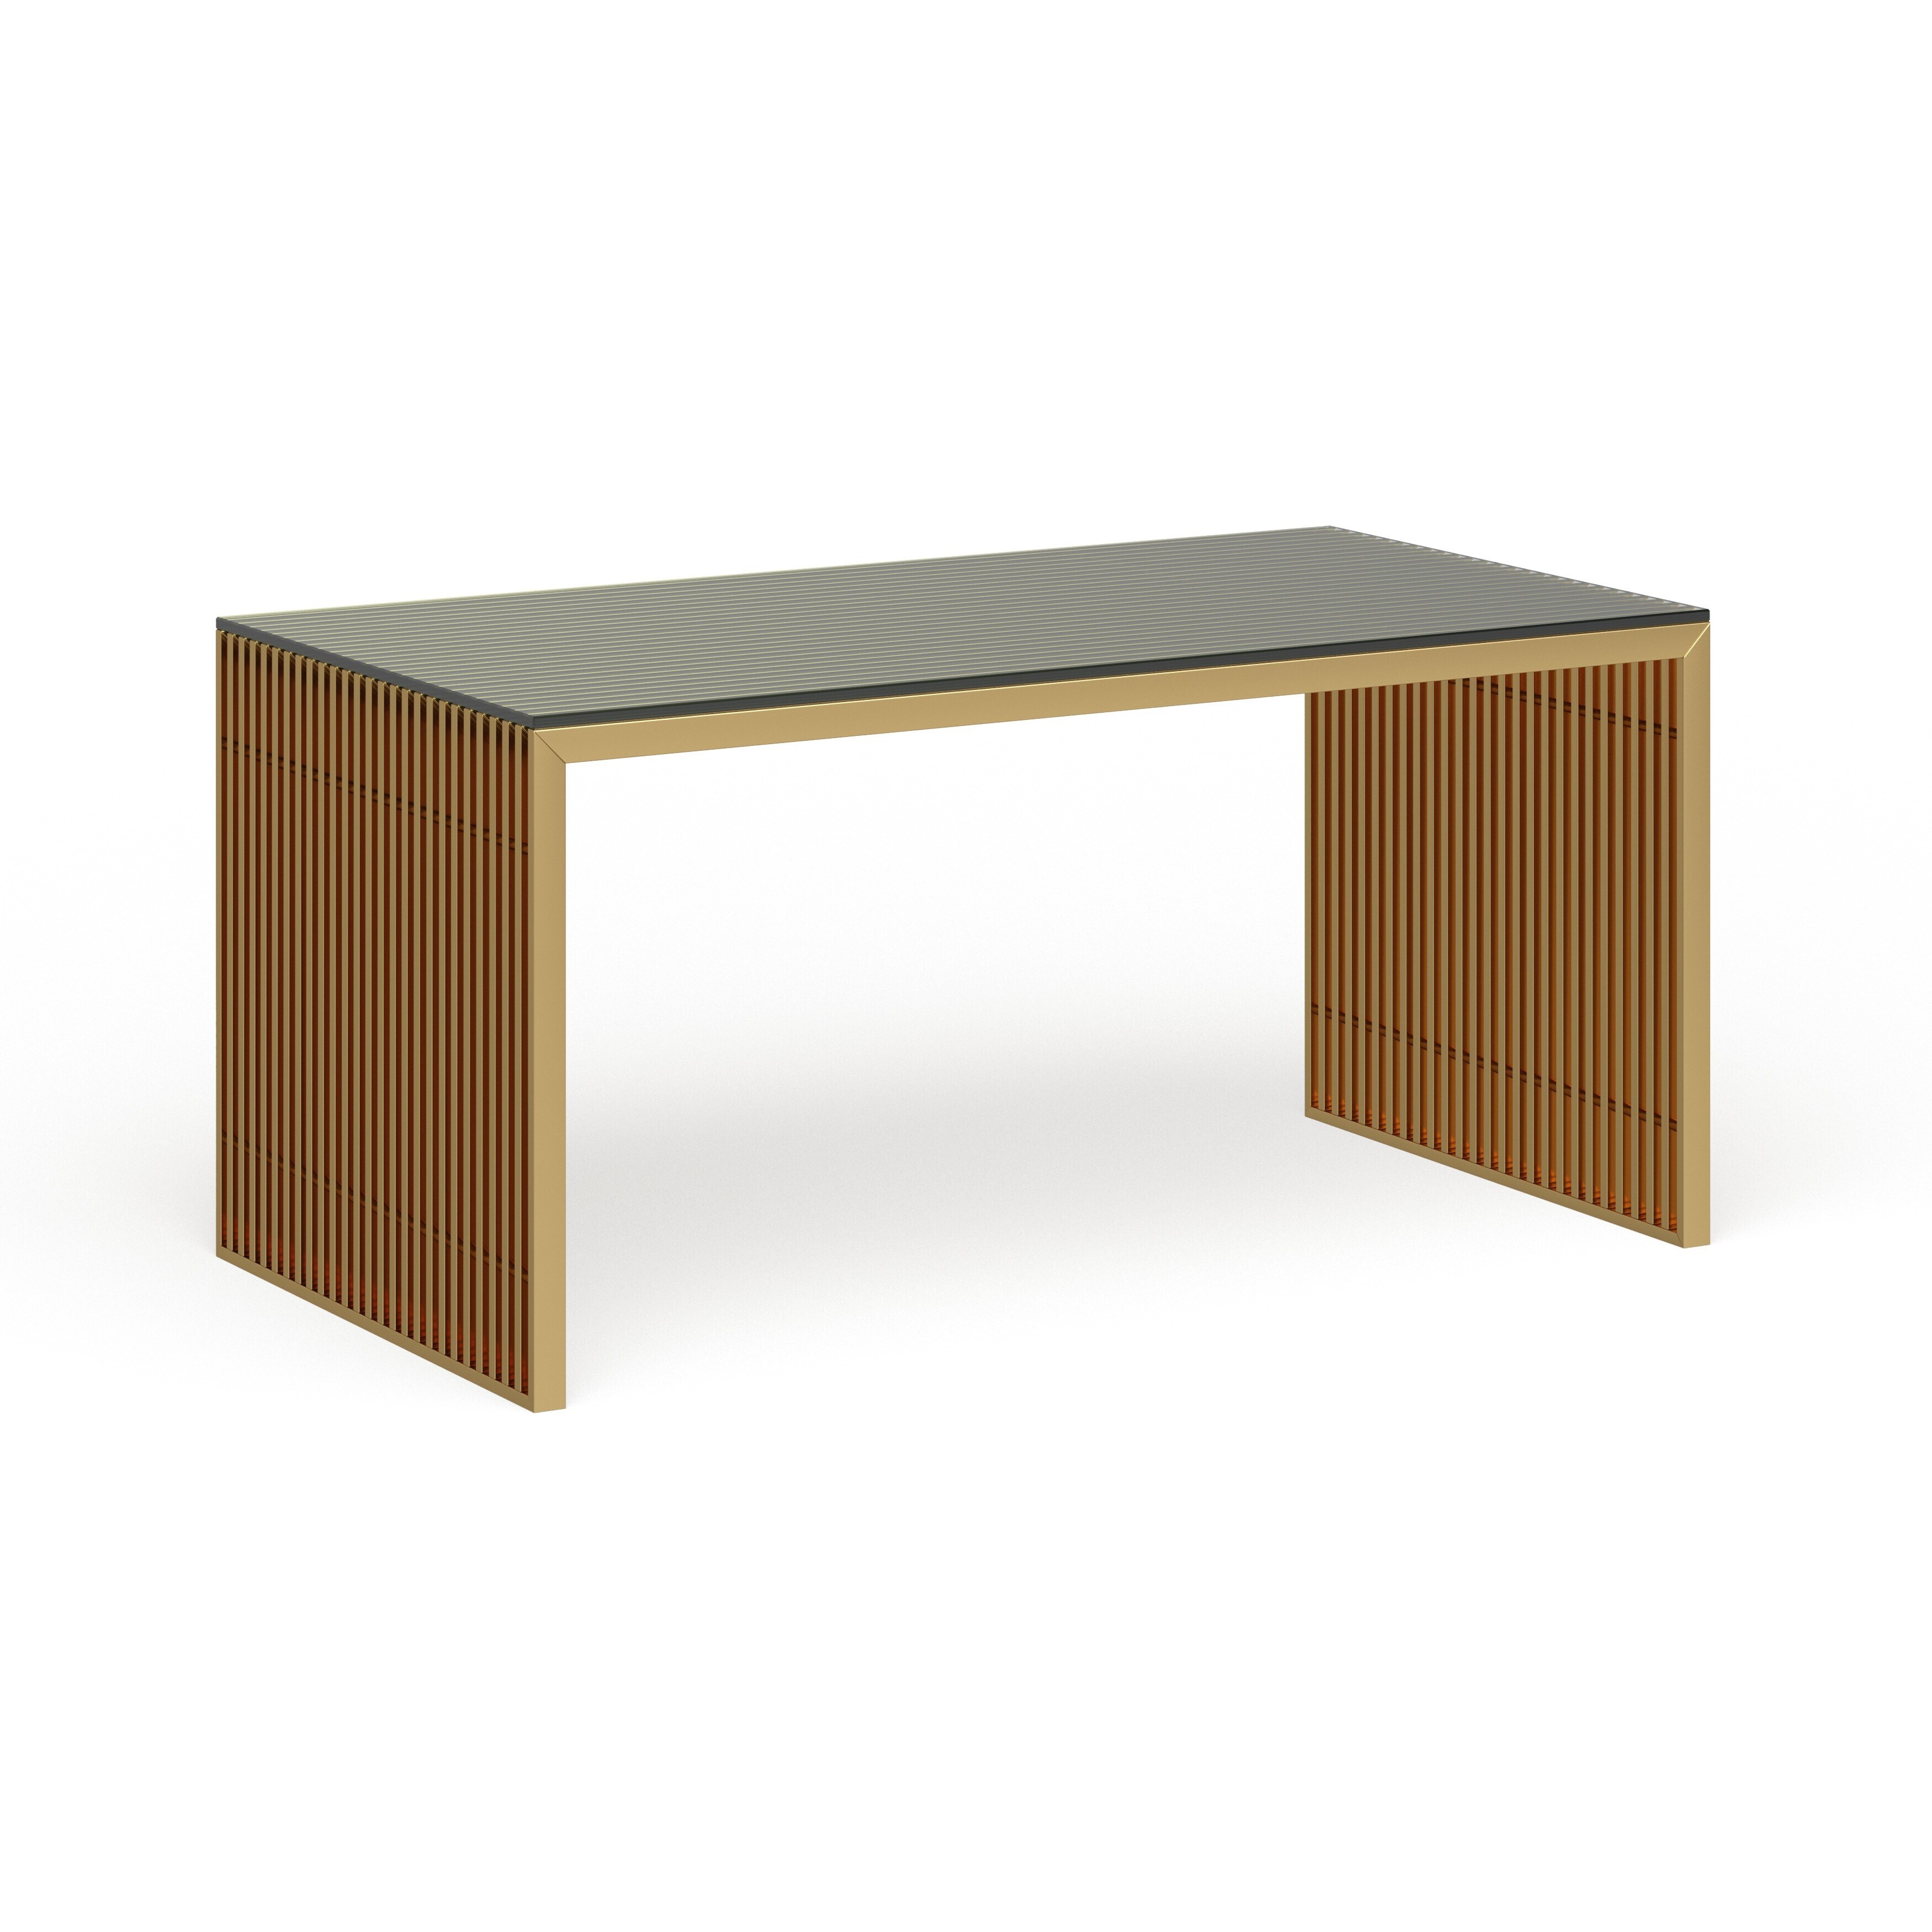 Gridiron Stainless Steel Dining Table - Gold